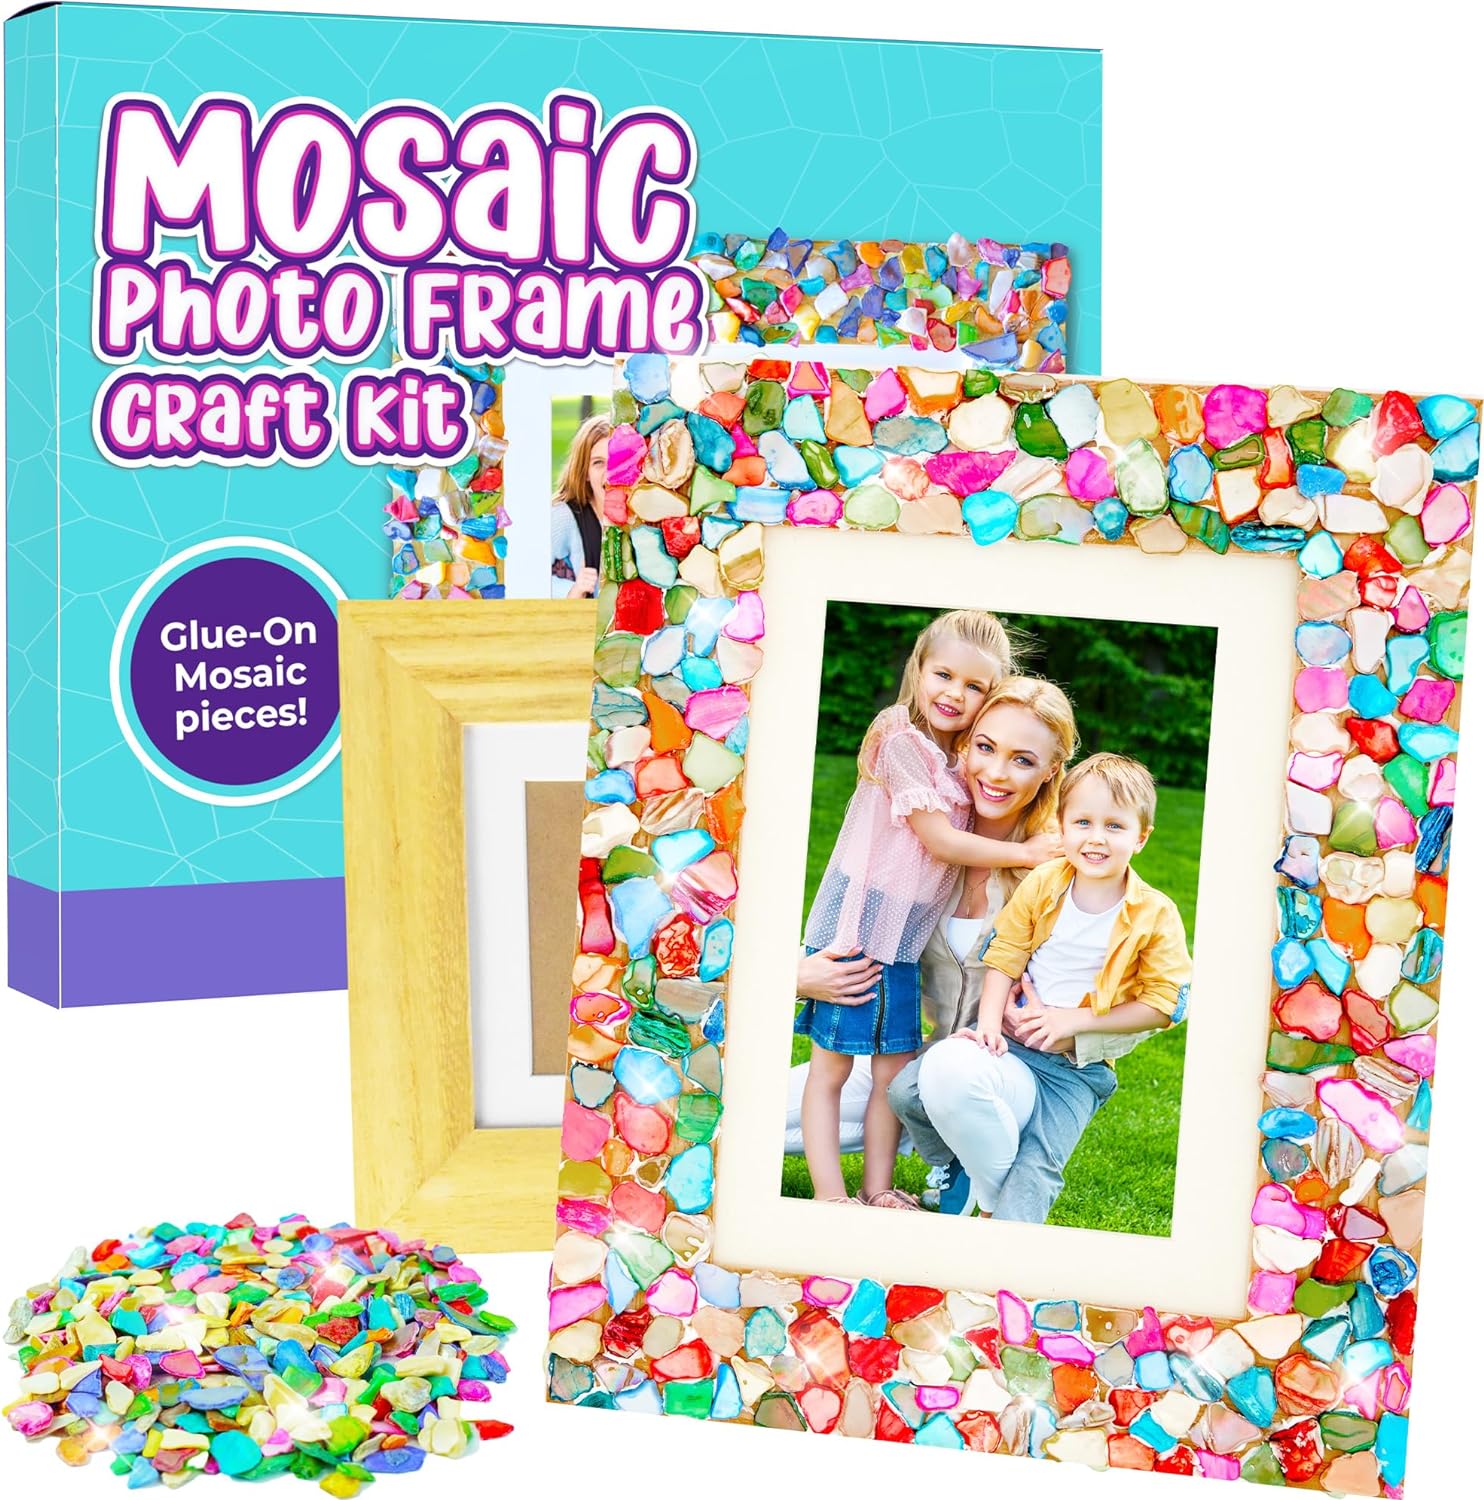 PURPLE LADYBUG Decorate Your Own Mosaic Photo Frame Craft Kits for Kids Age 6+ - Creative Gifts for 10 Year Old, Birthday Gifts for Teenage Girls, Arts & Crafts Presents for Children Ages 7 8 9